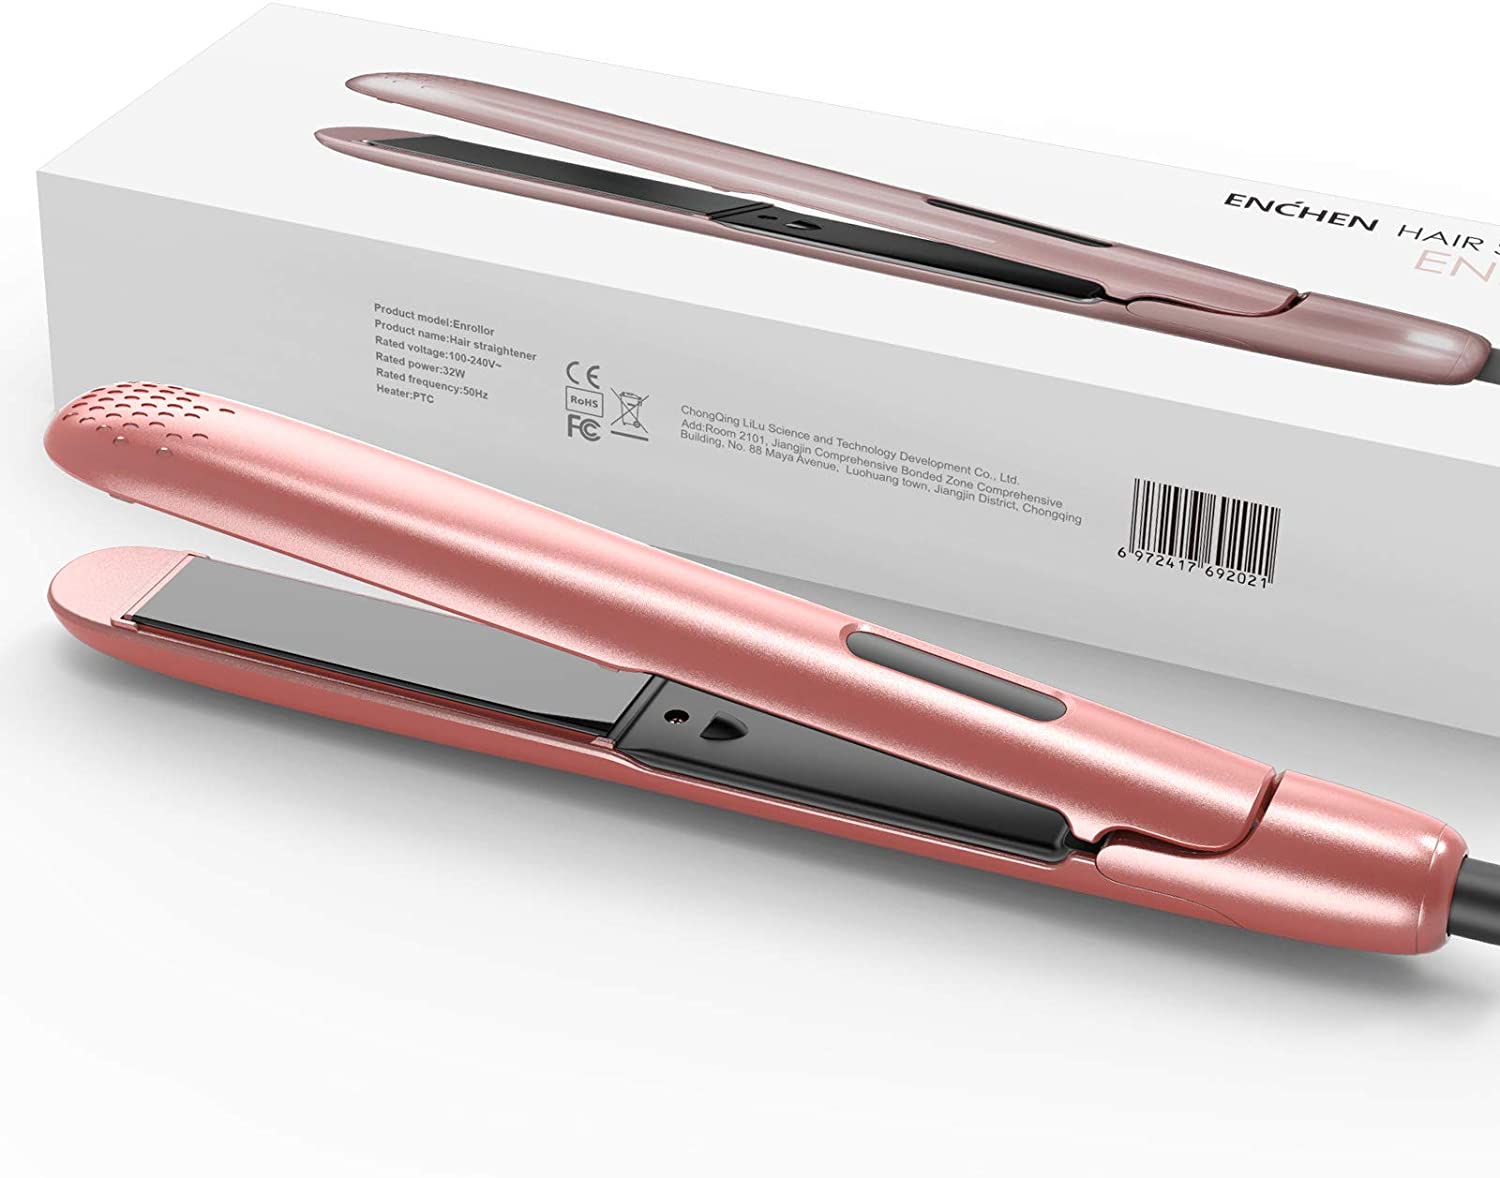 ENCHEN Dual-Use Hair Straightener Flat Iron, 2 in 1 Hairstyling Straightener and Curler, Anti-Scald 140℃~200℃ Constant Temperature 30s Fast Heating Hair Iron Straightening with Ceramic Plate